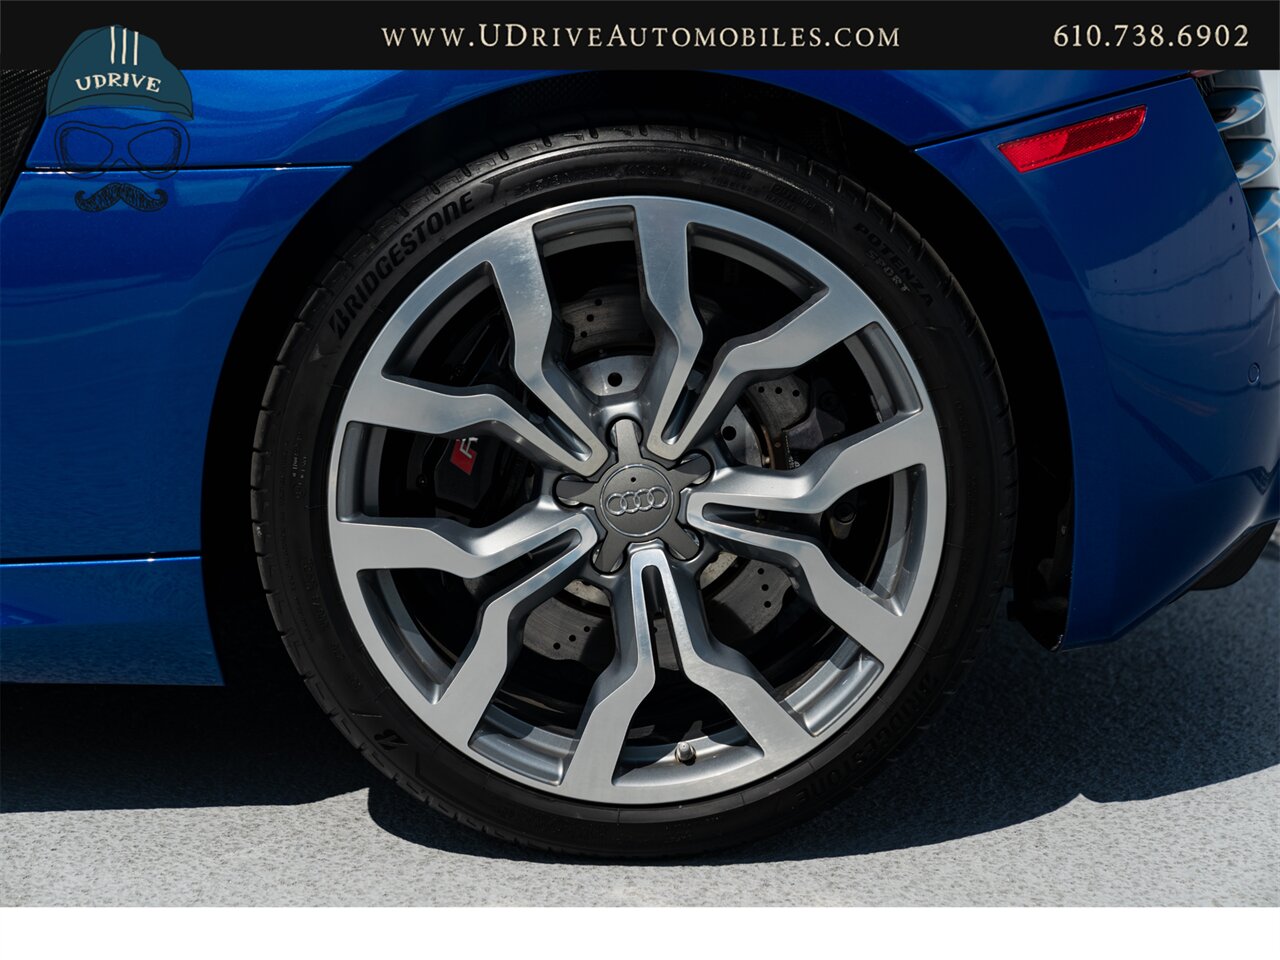 2015 Audi R8 5.2 V10 Quattro 6 Speed Manual 10k Miles  Diamond Stitched Leather 1 of 2 - Photo 53 - West Chester, PA 19382